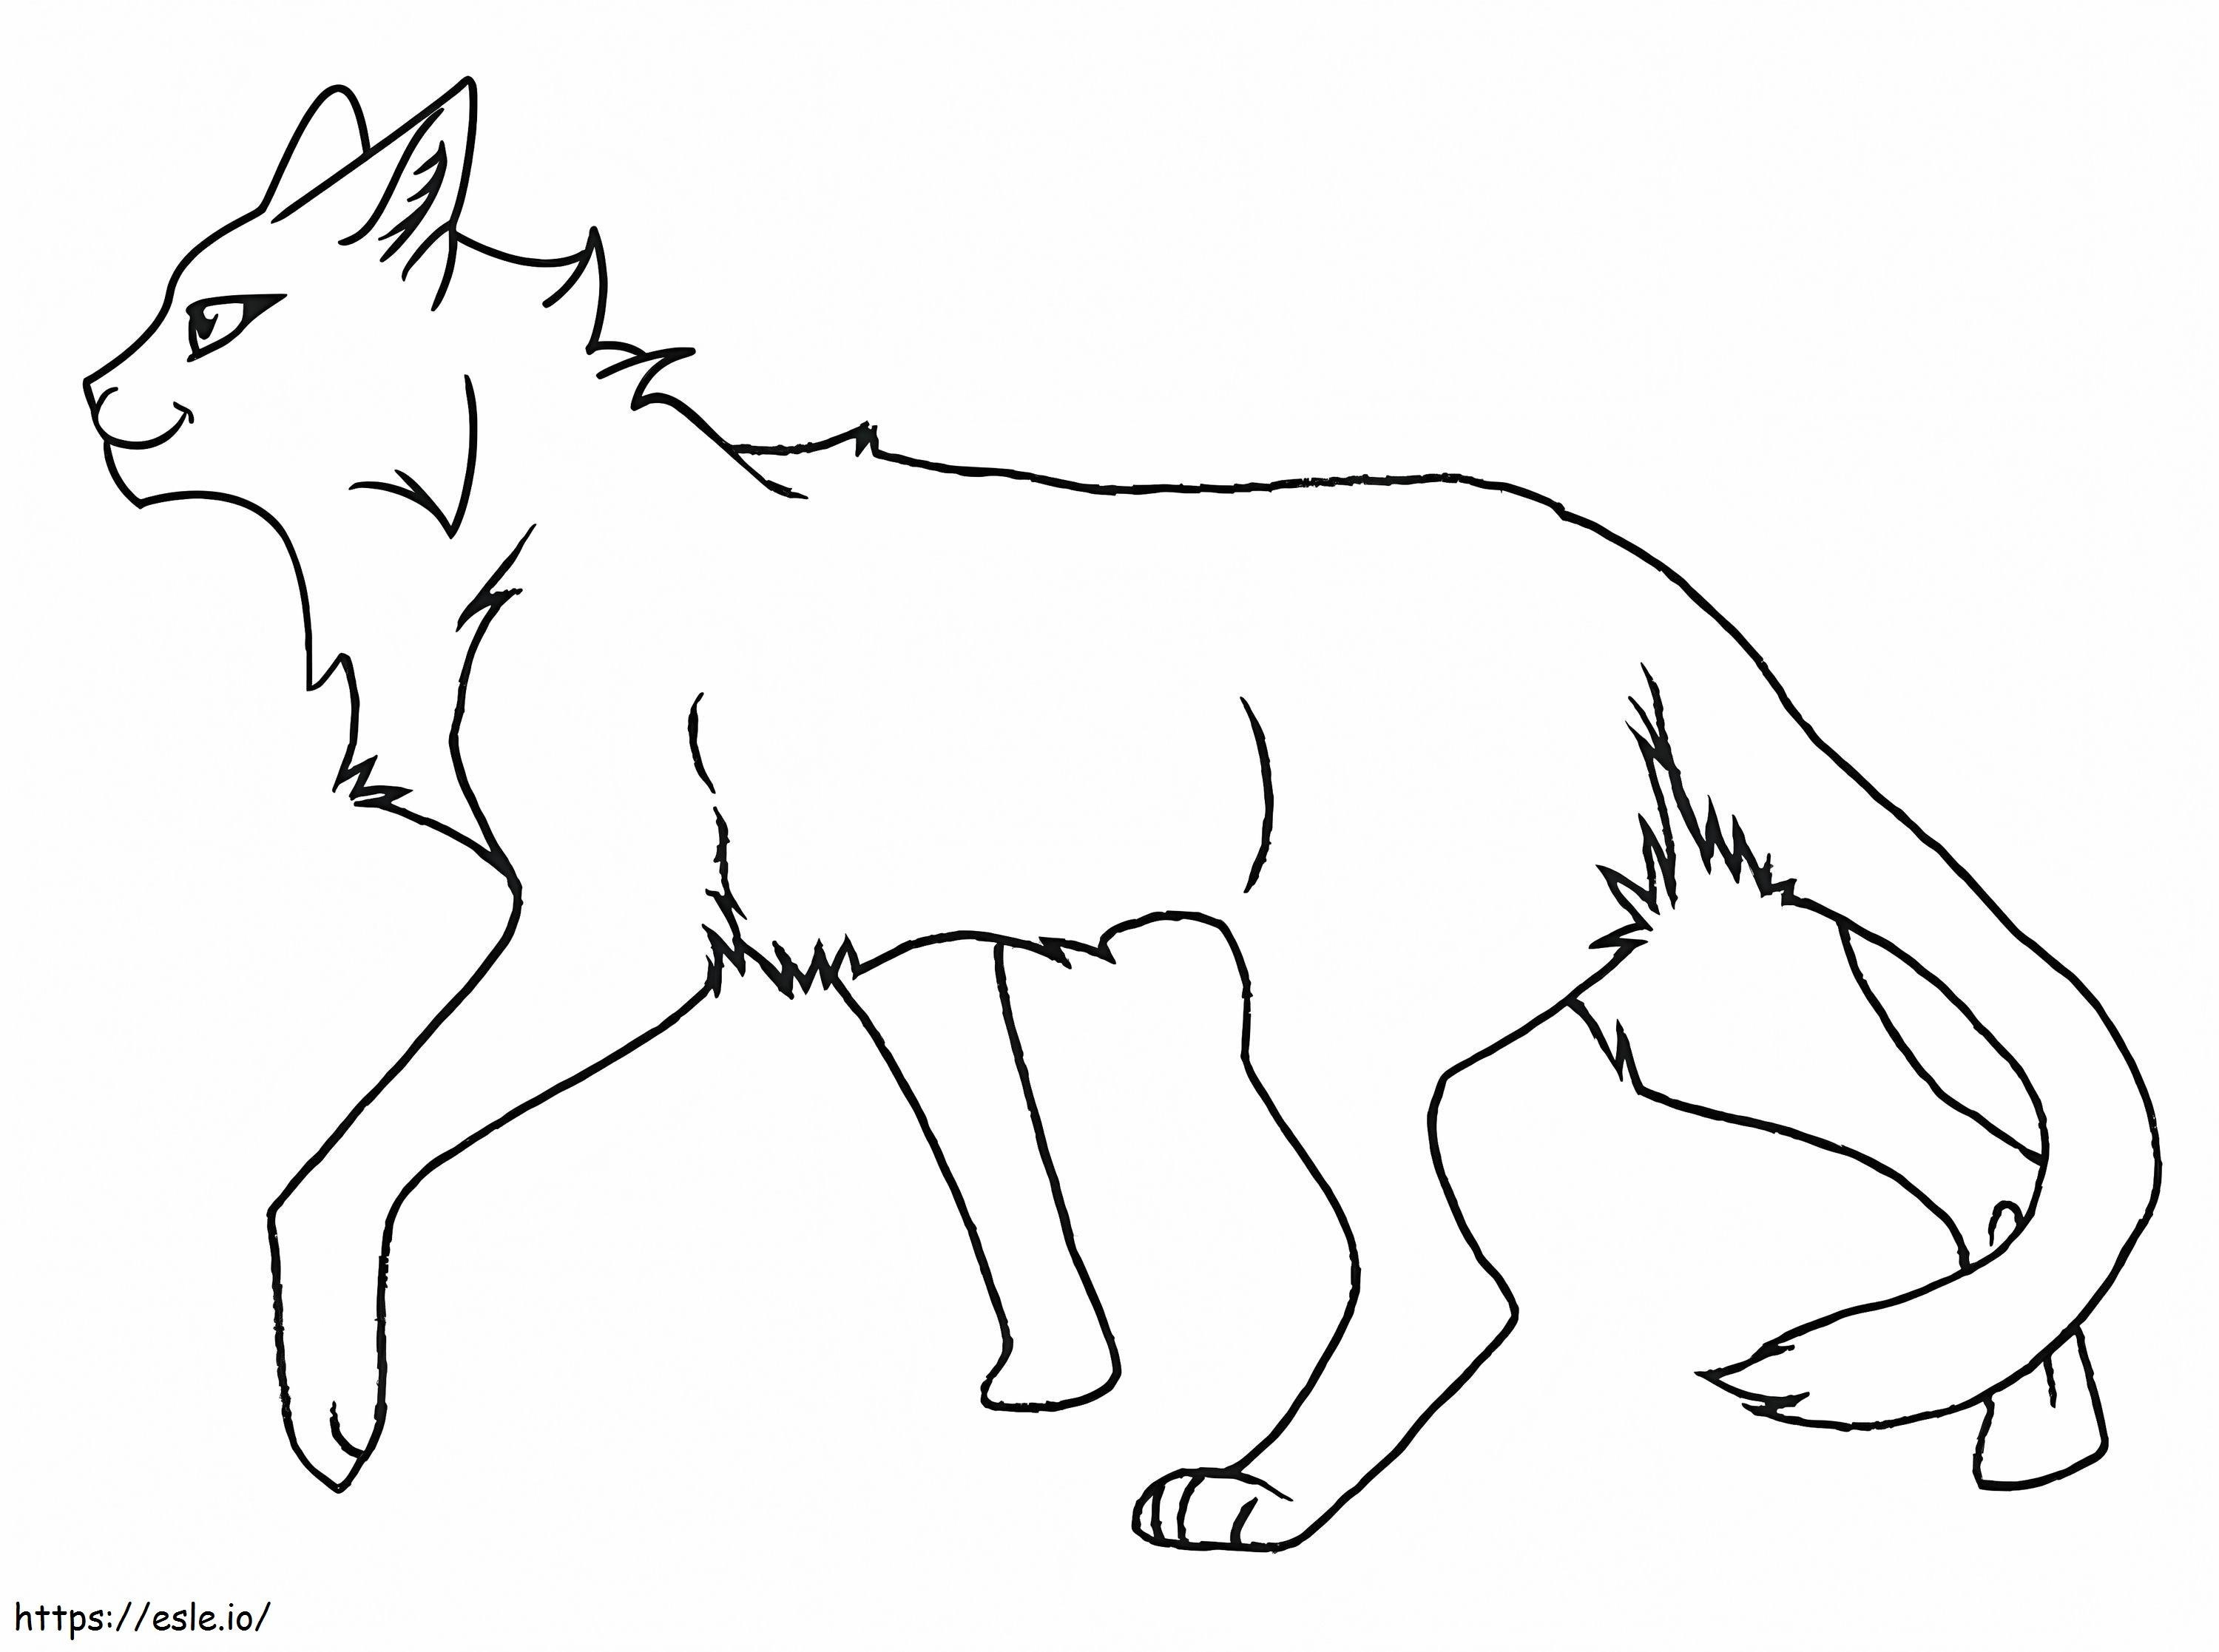 Awesome Warrior Cat coloring page